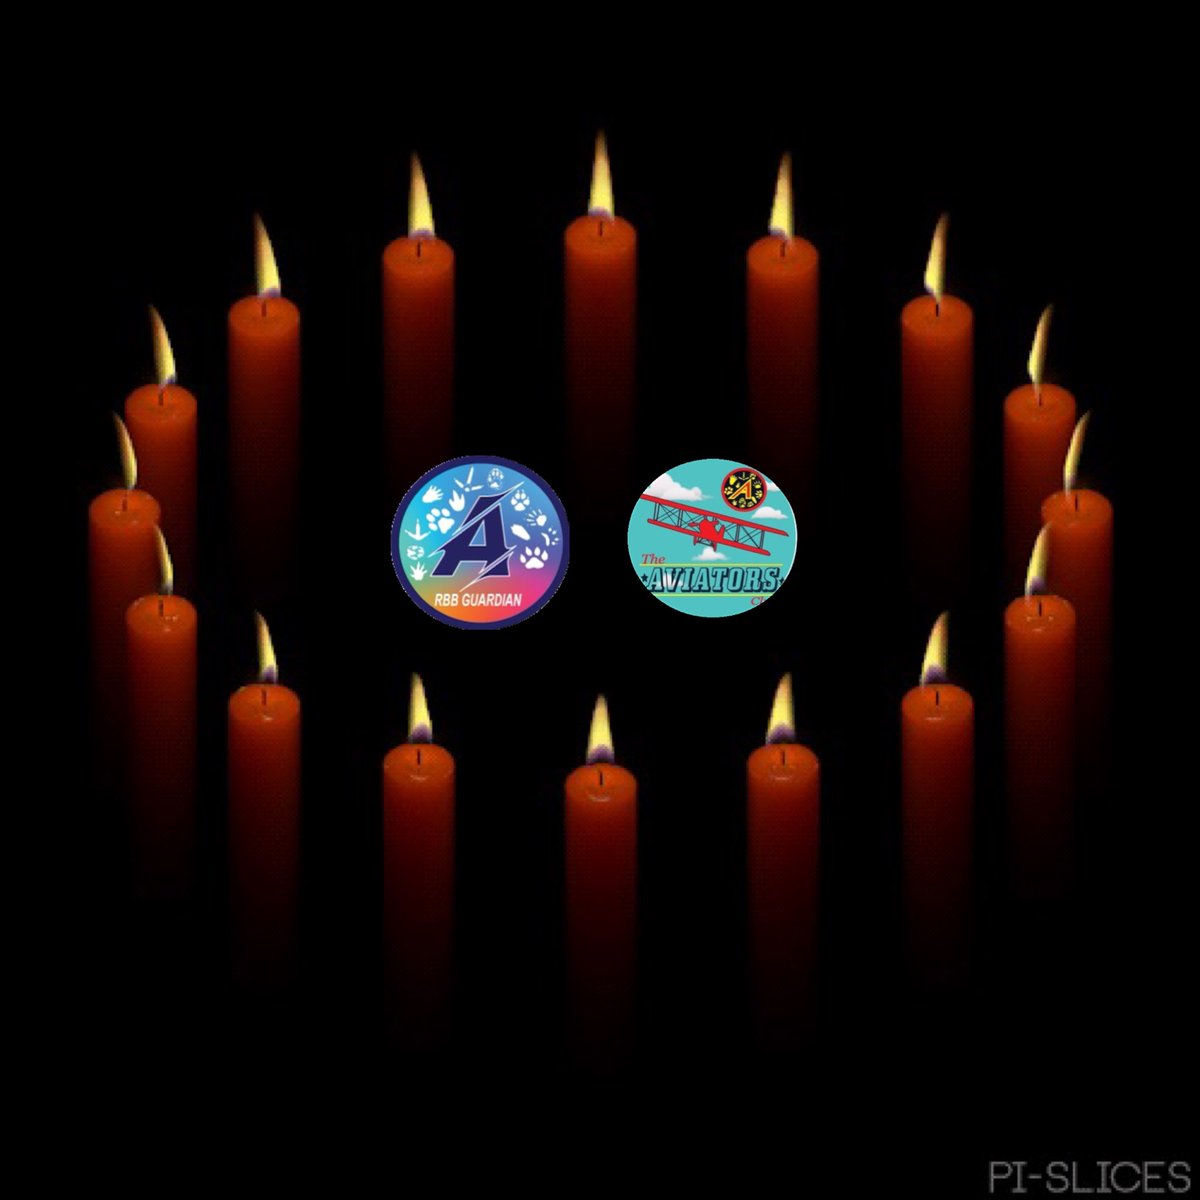 🌈🛩️💔We will burn our #TheAviators groupcandle today for our Aviator and sweet friend Captain Abby @sweetAbby20 who crossed 🌈Bridge. Fly High now sweet Abby. May this candle enlighten your path and bring comfort to your family and friends. Until we meet again 🌈✨